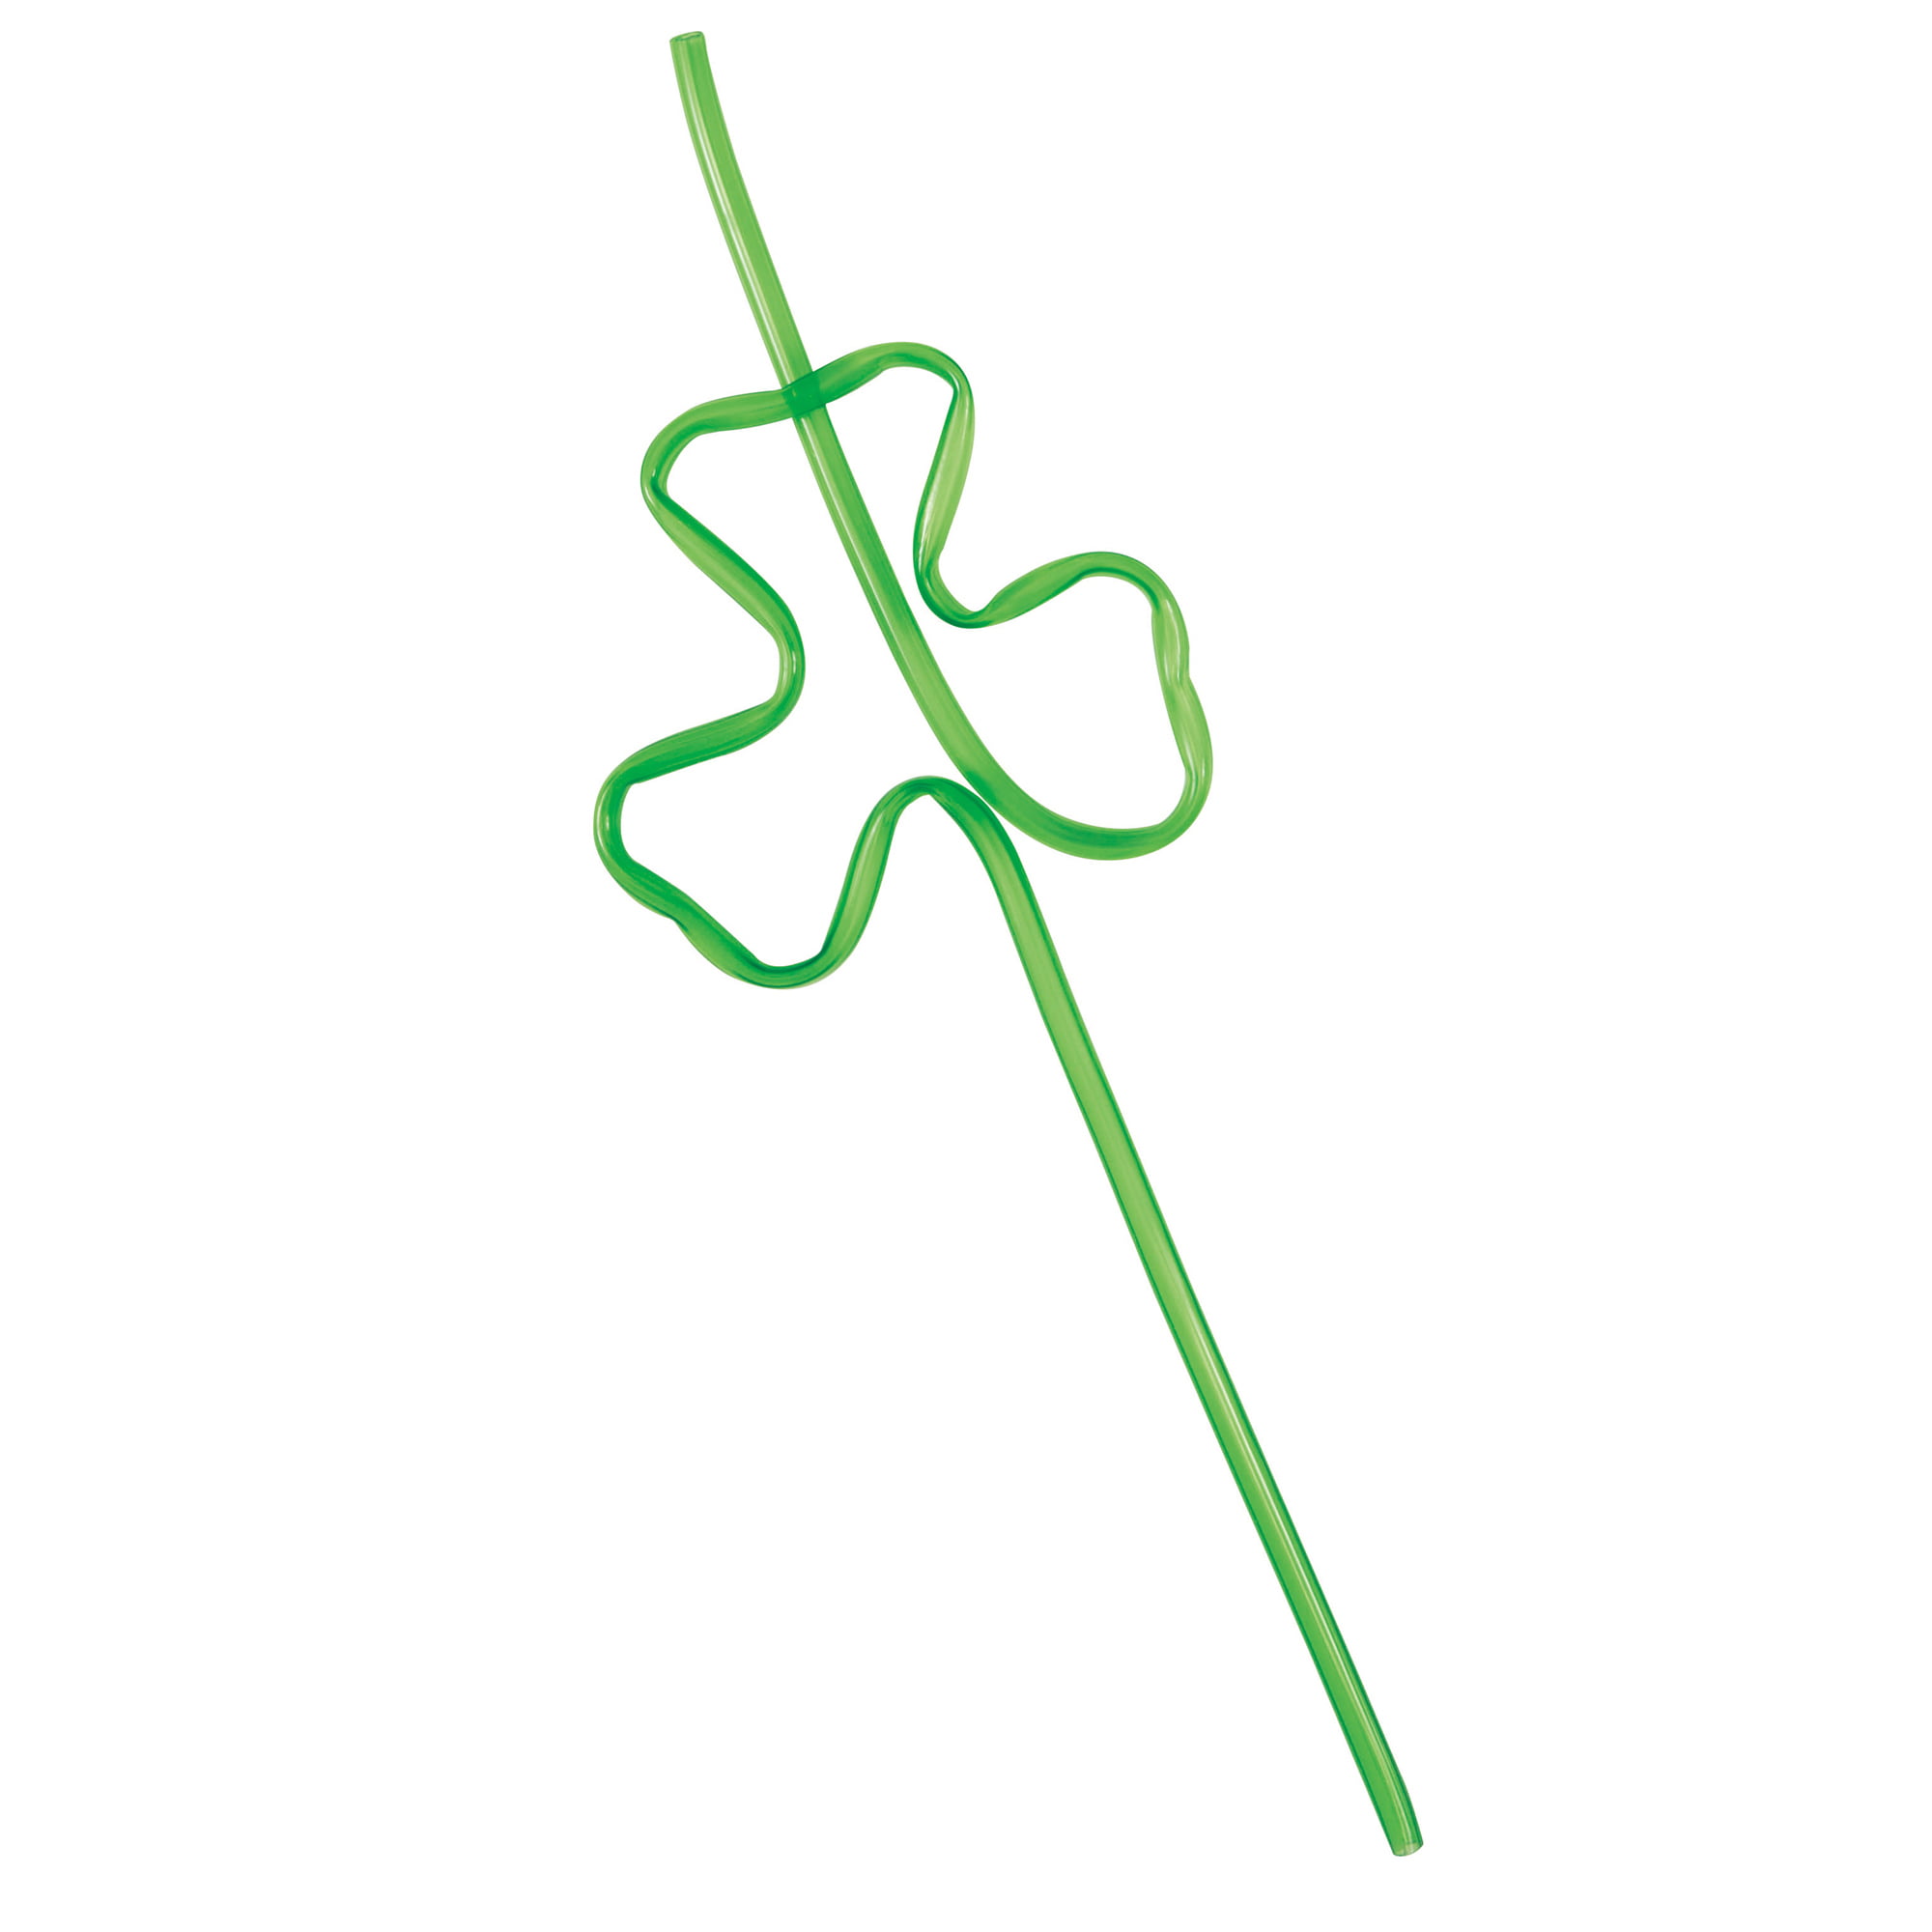 Details about   2 PACK OF 6 HAPPY ST PATRICK'S DAY GREEN PLASTIC PARTY STRAWS PATRICK SHAMROCK 